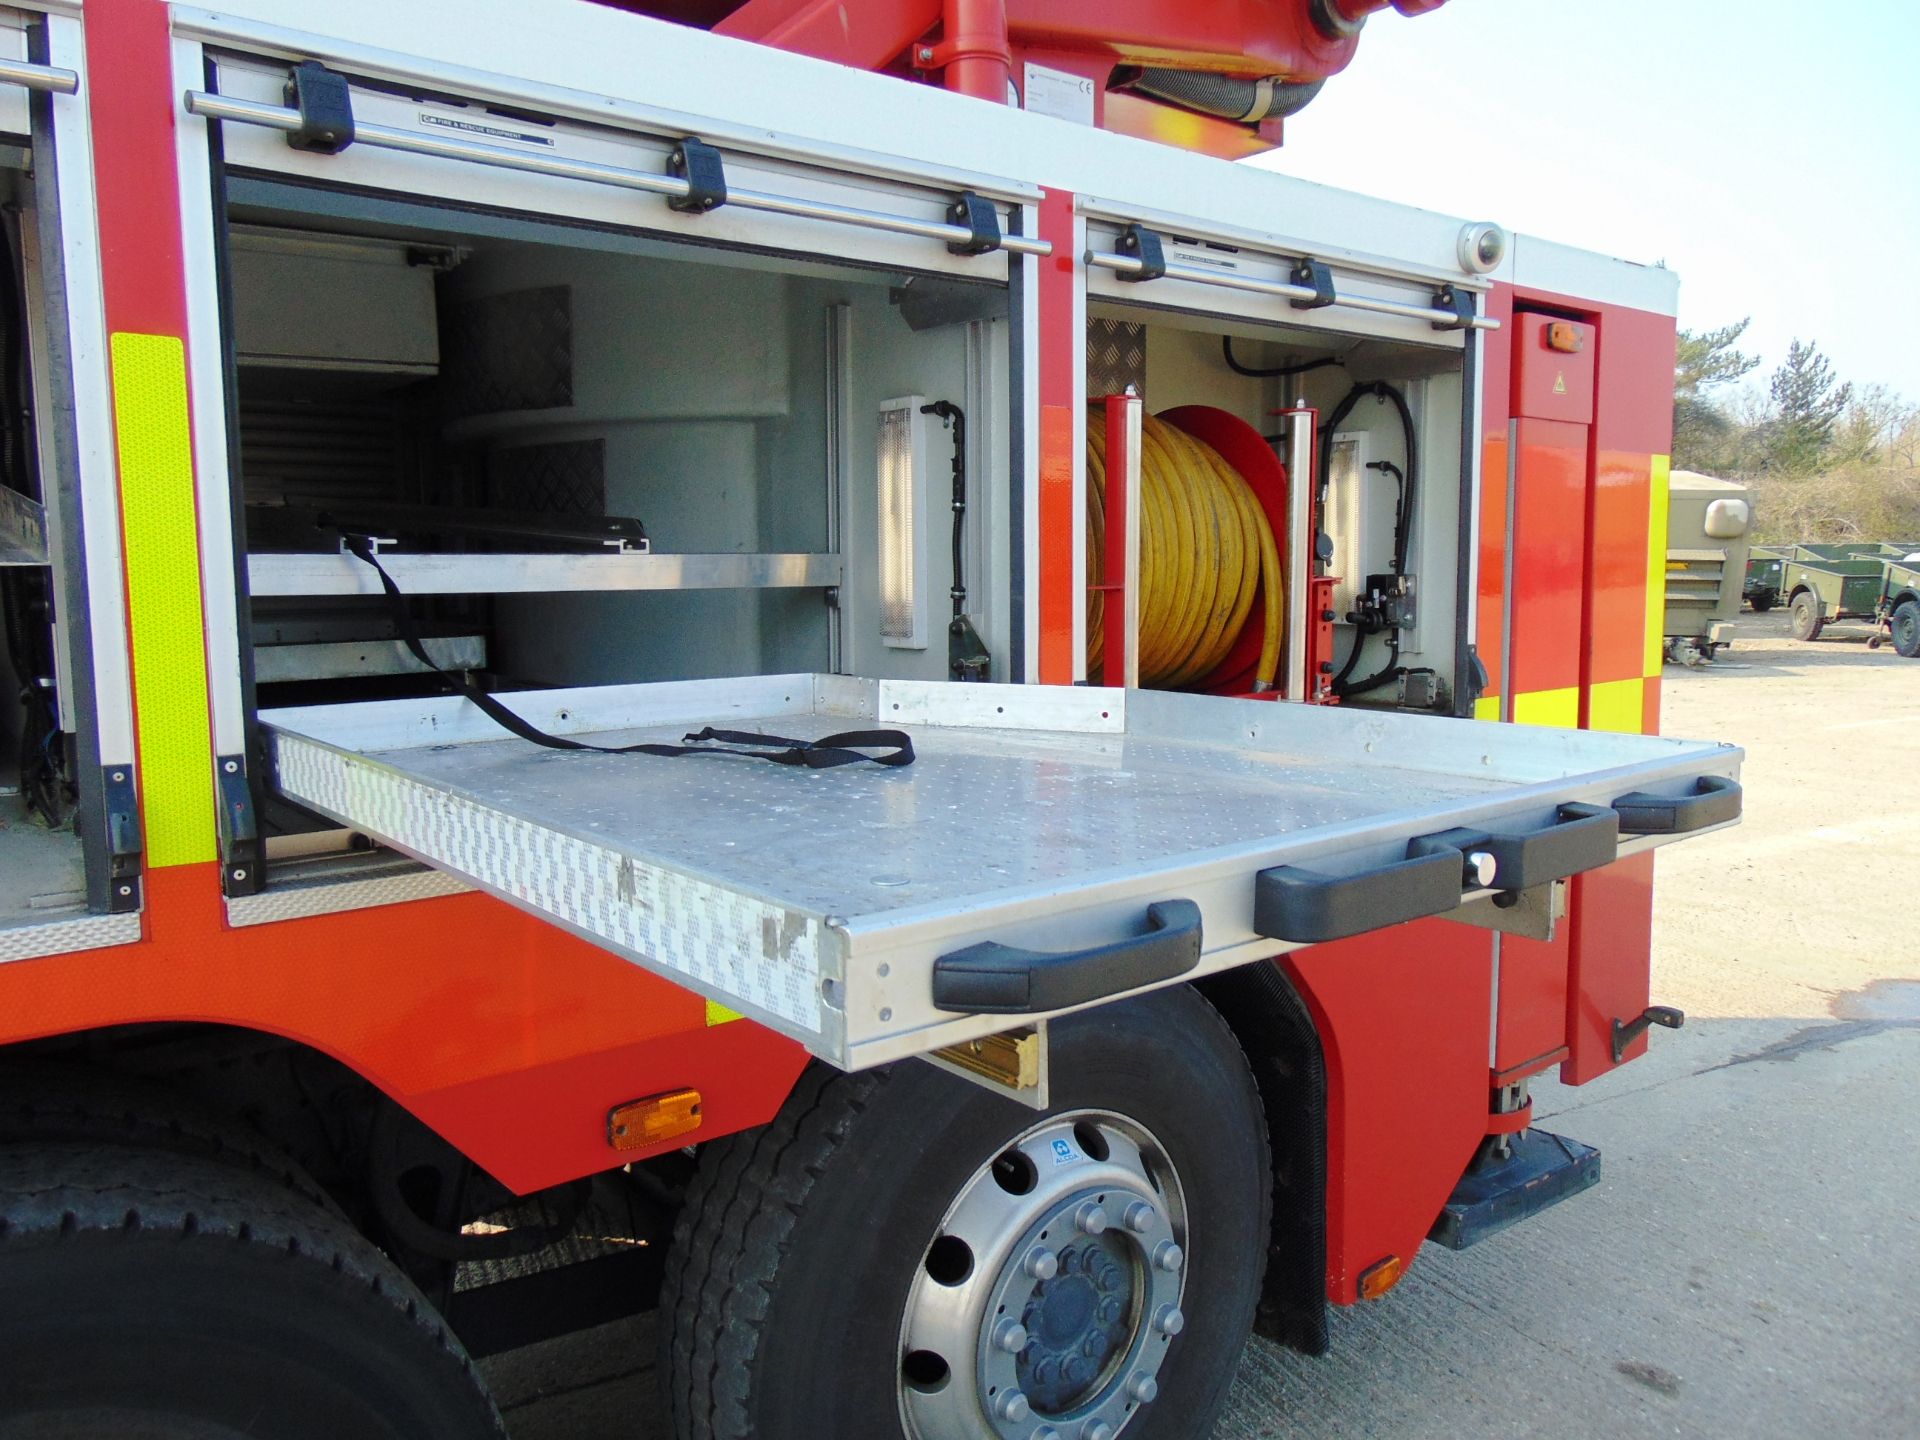 2008 Mercedes Econic CARP (Combined Aerial Rescue Pump) 6x2 Aerial Work Platform / Fire Appliance - Image 39 of 49